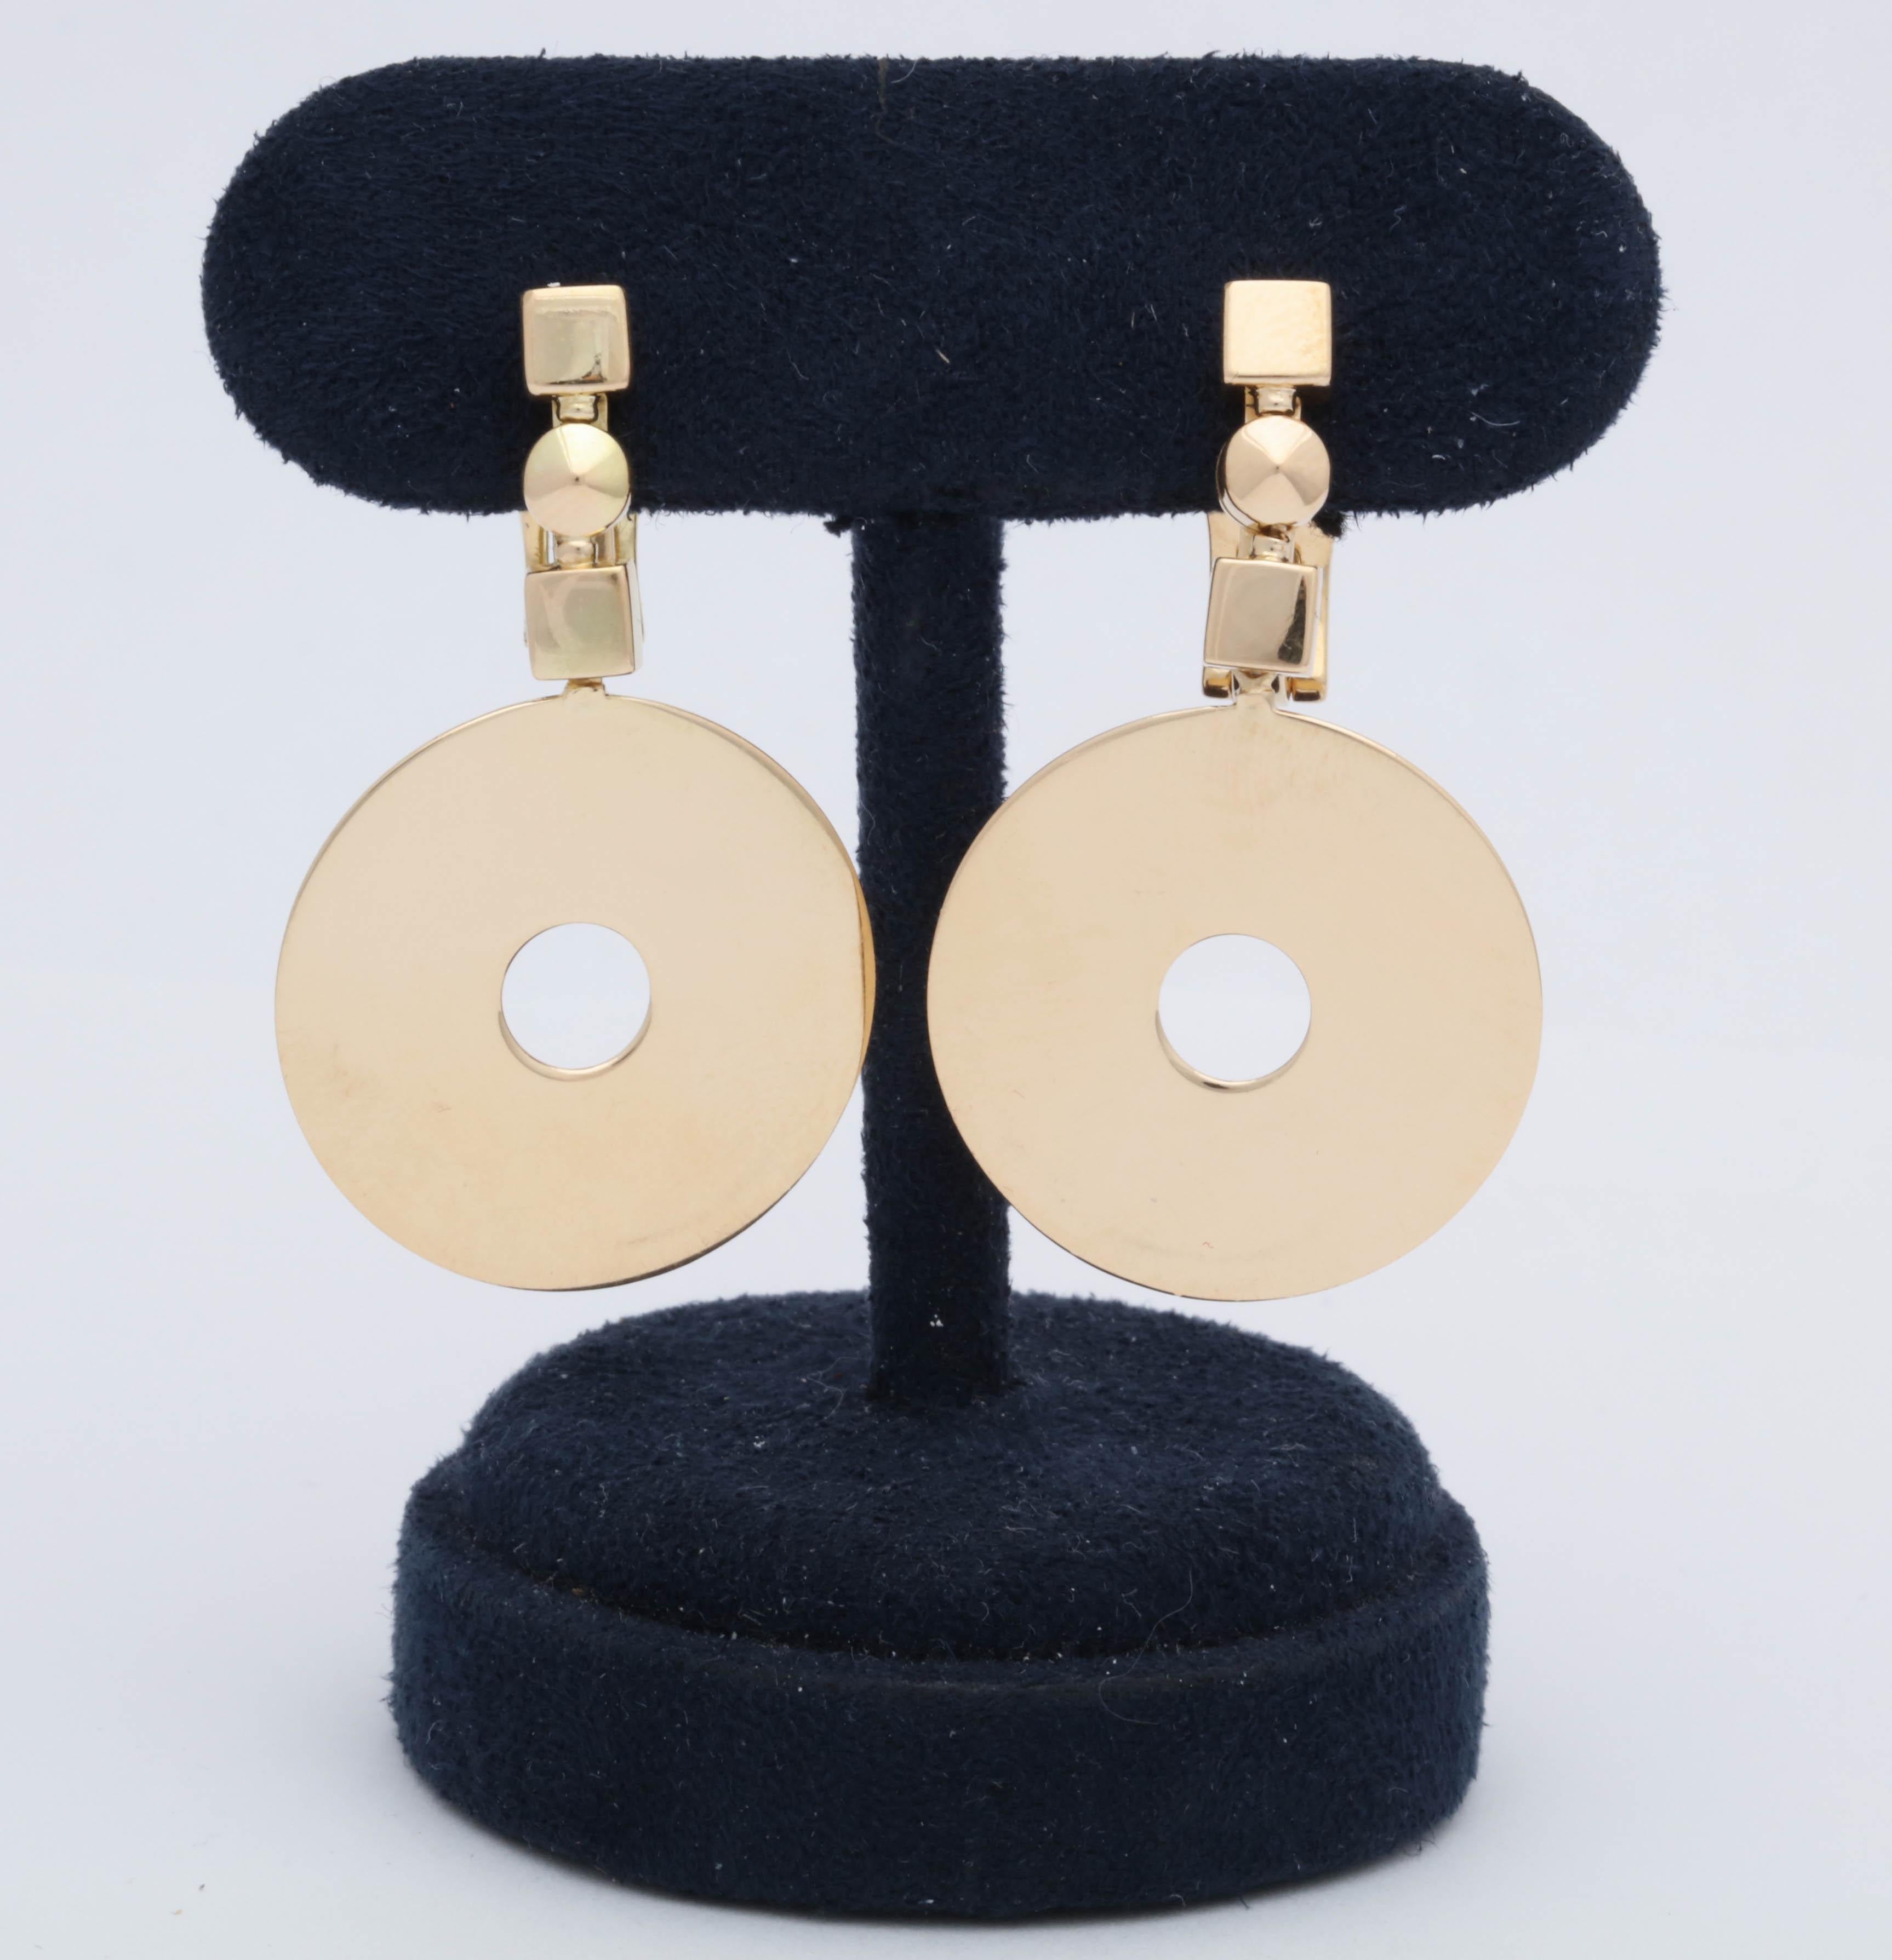 One Pair Of Ladies Stylized Circular High Polish 18kt Yellow Gold Earrings In Form Of A Flexible And Moveable Discs When Worn. Designed By Bulgari In The 1980's Made In Italy.